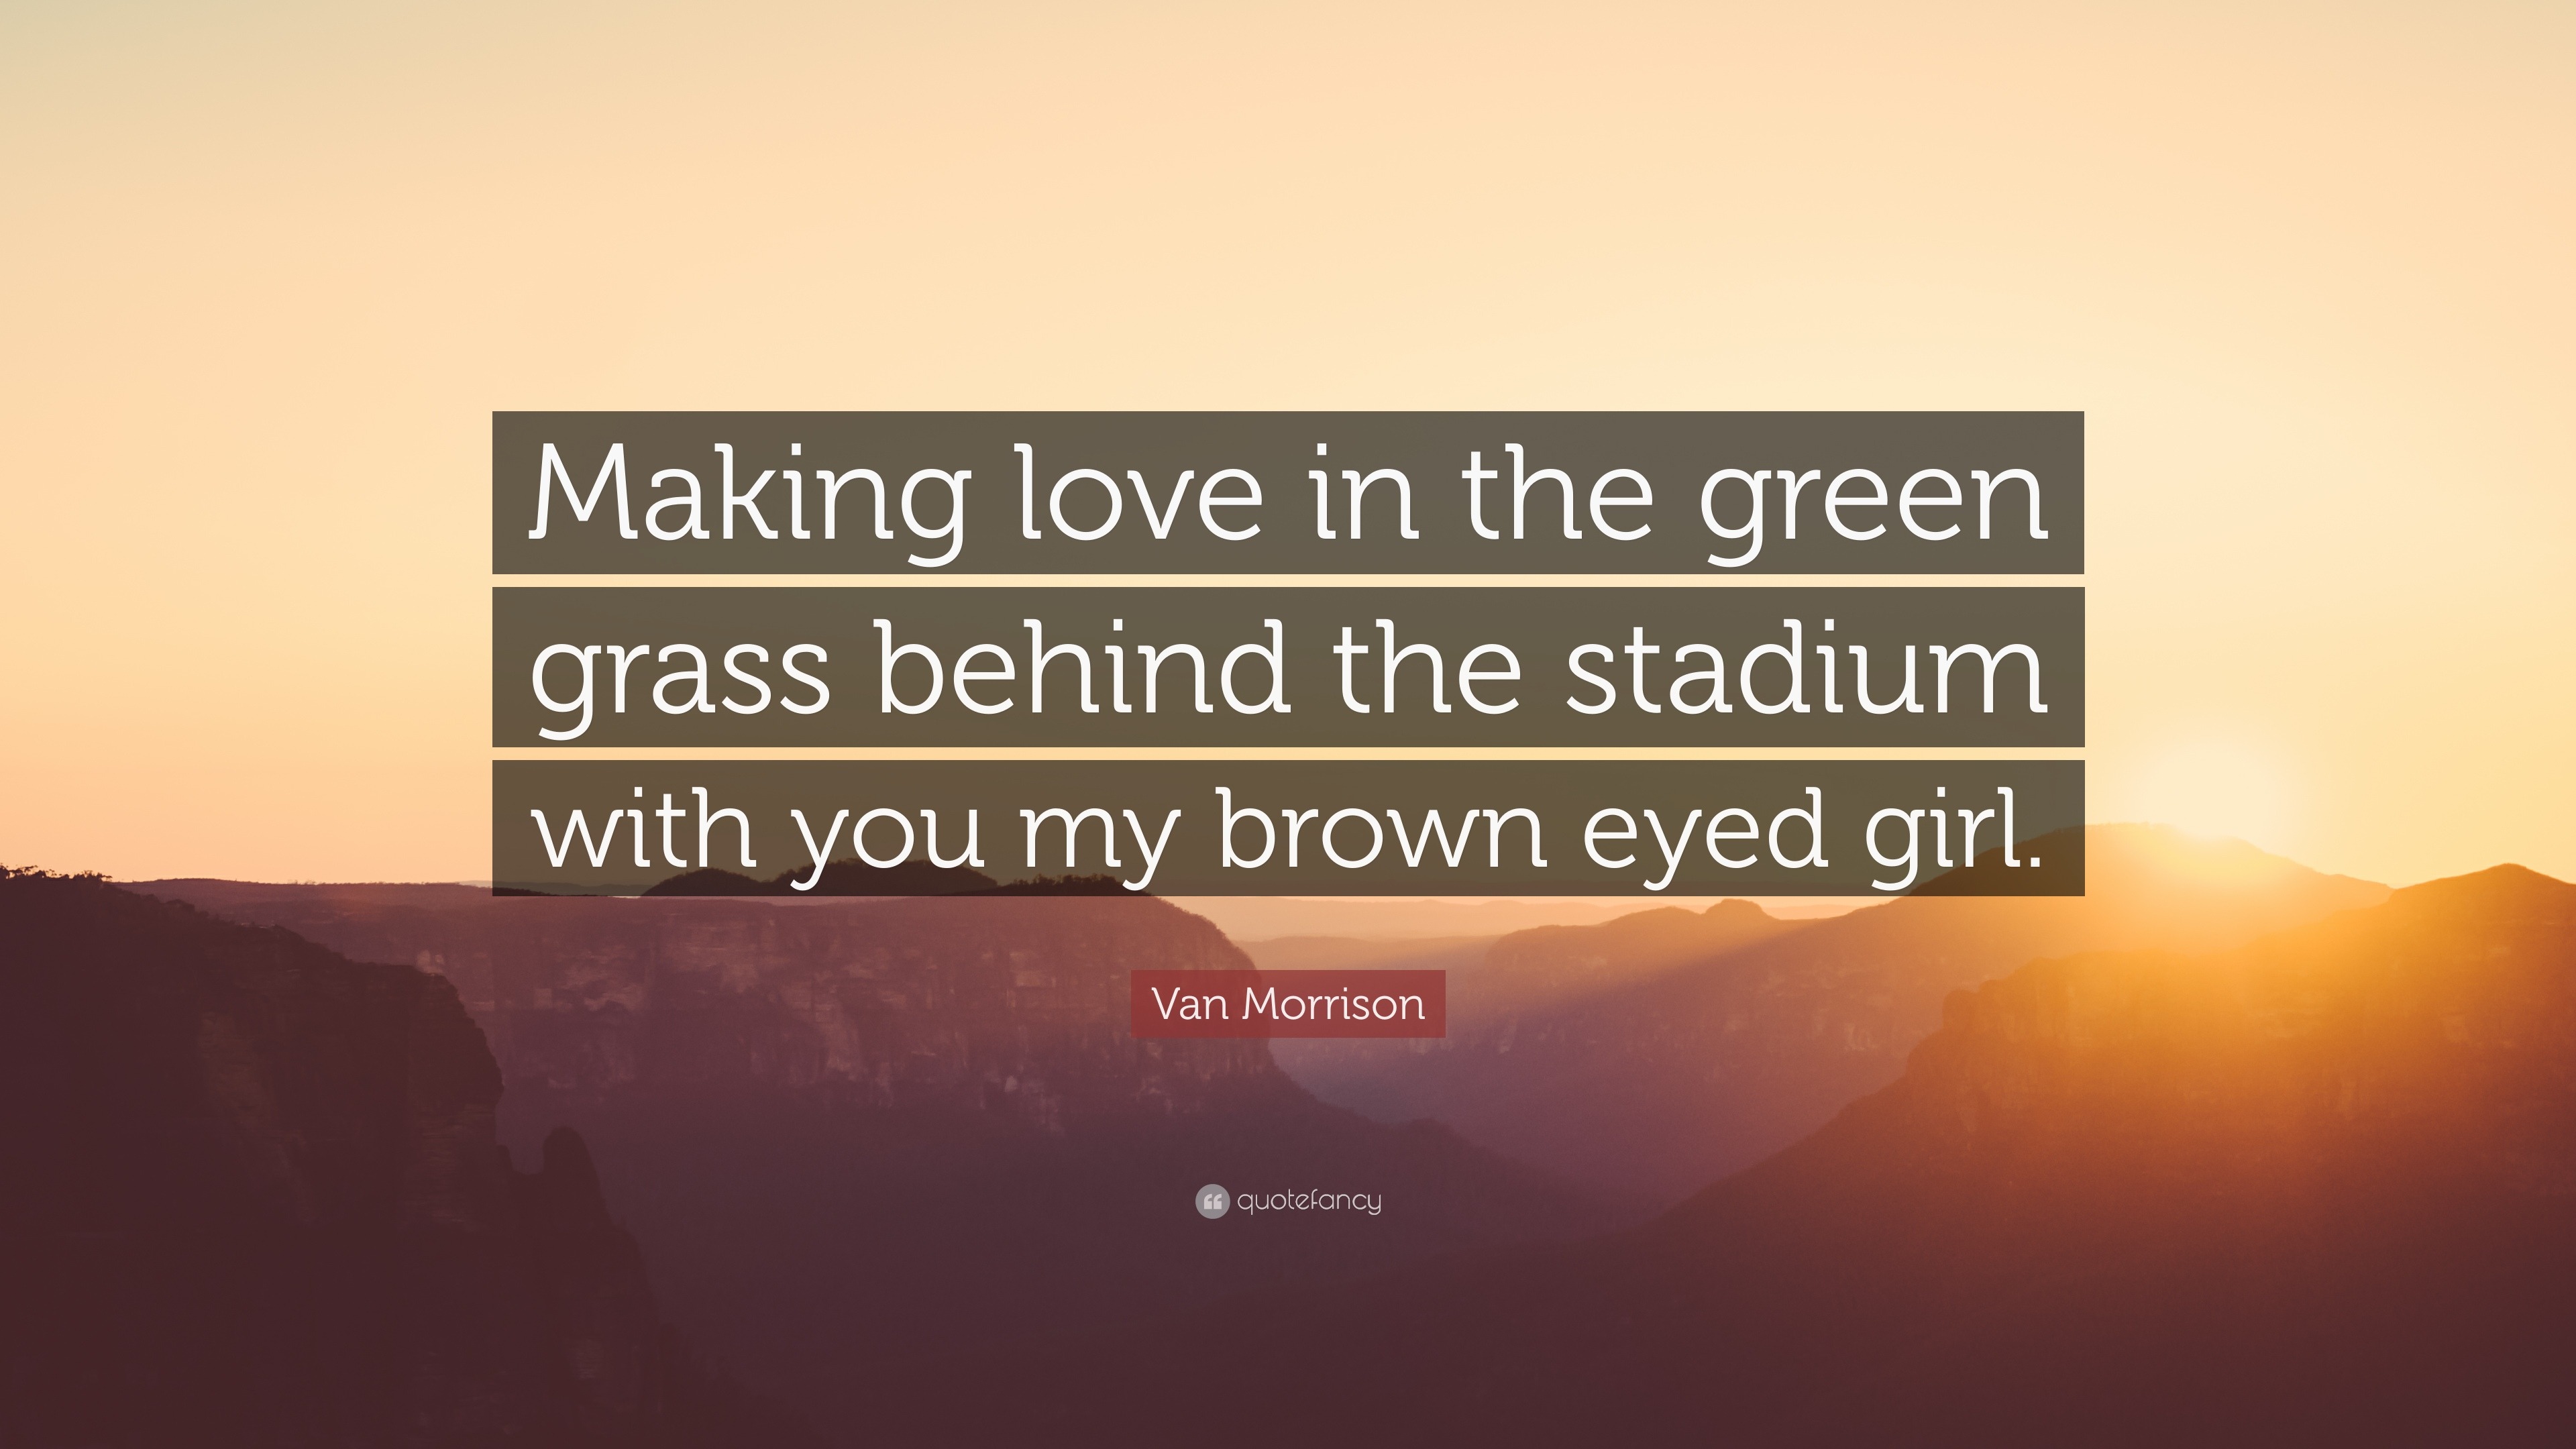 Van Morrison Quote “Making love in the green grass behind the stadium with you